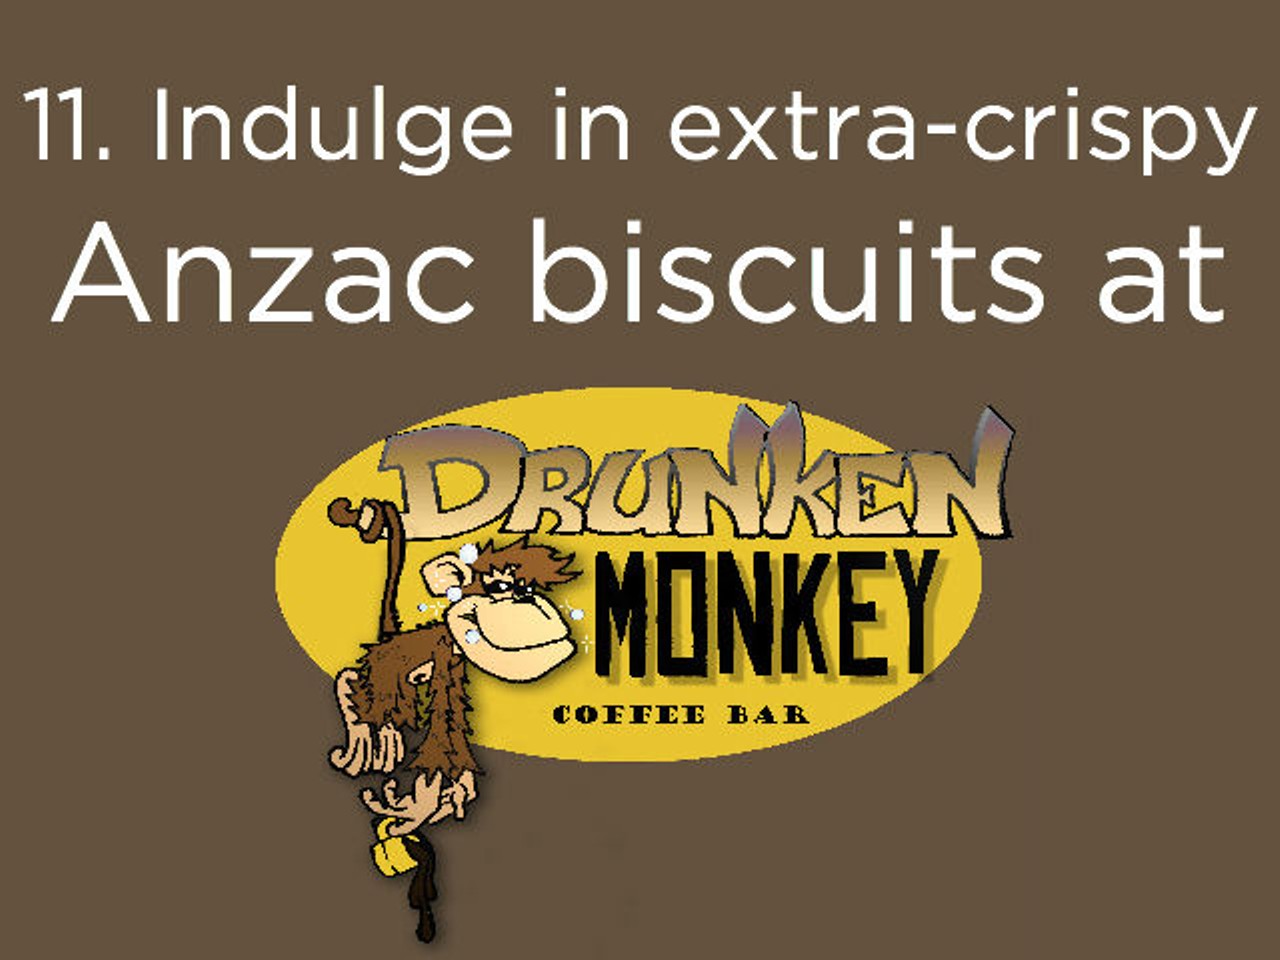 11. Anzac biscuits were originally baked to be sent off in care packages for Australian soldiers. But you can indulge in their extra-crispy deliciousness at Drunken Monkey (444 N. Bumby Ave., drunkenmonkeycoffee.com) in relative safety. We don&#146;t want to start a war, but it might just be the greatest cookie in town.